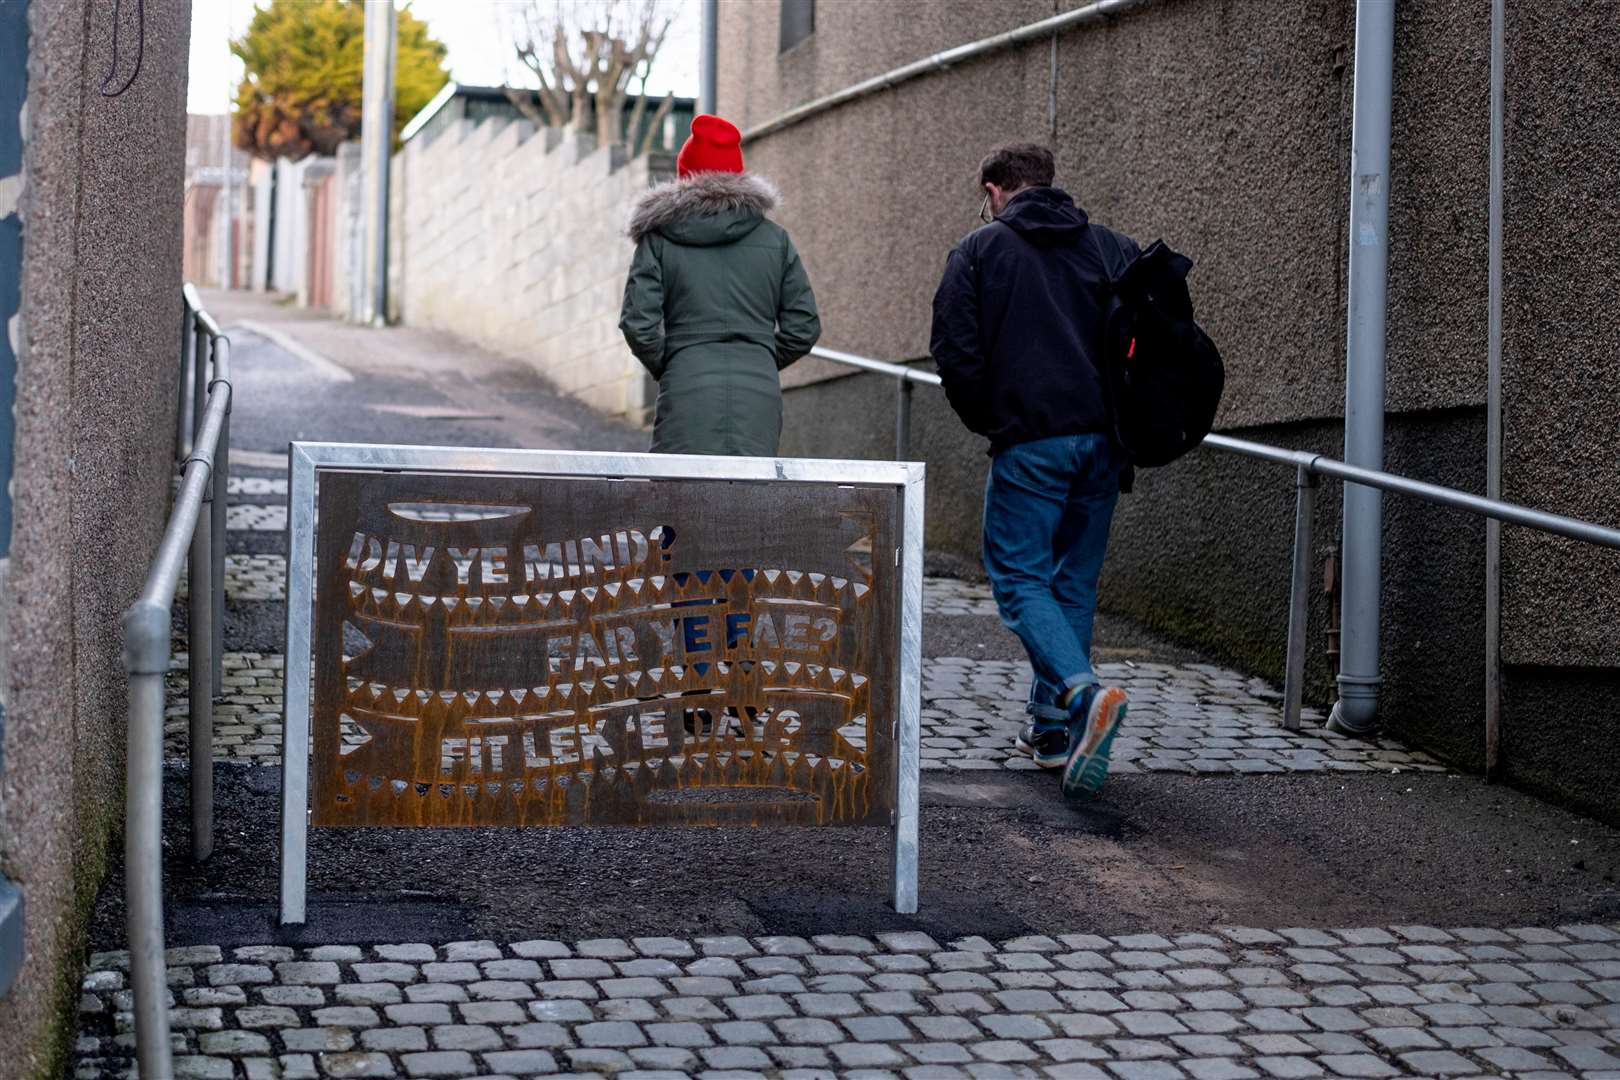 A decorative metal barrier featuring phrases in Caithness dialect has been installed at John Street. Picture: Sustrans